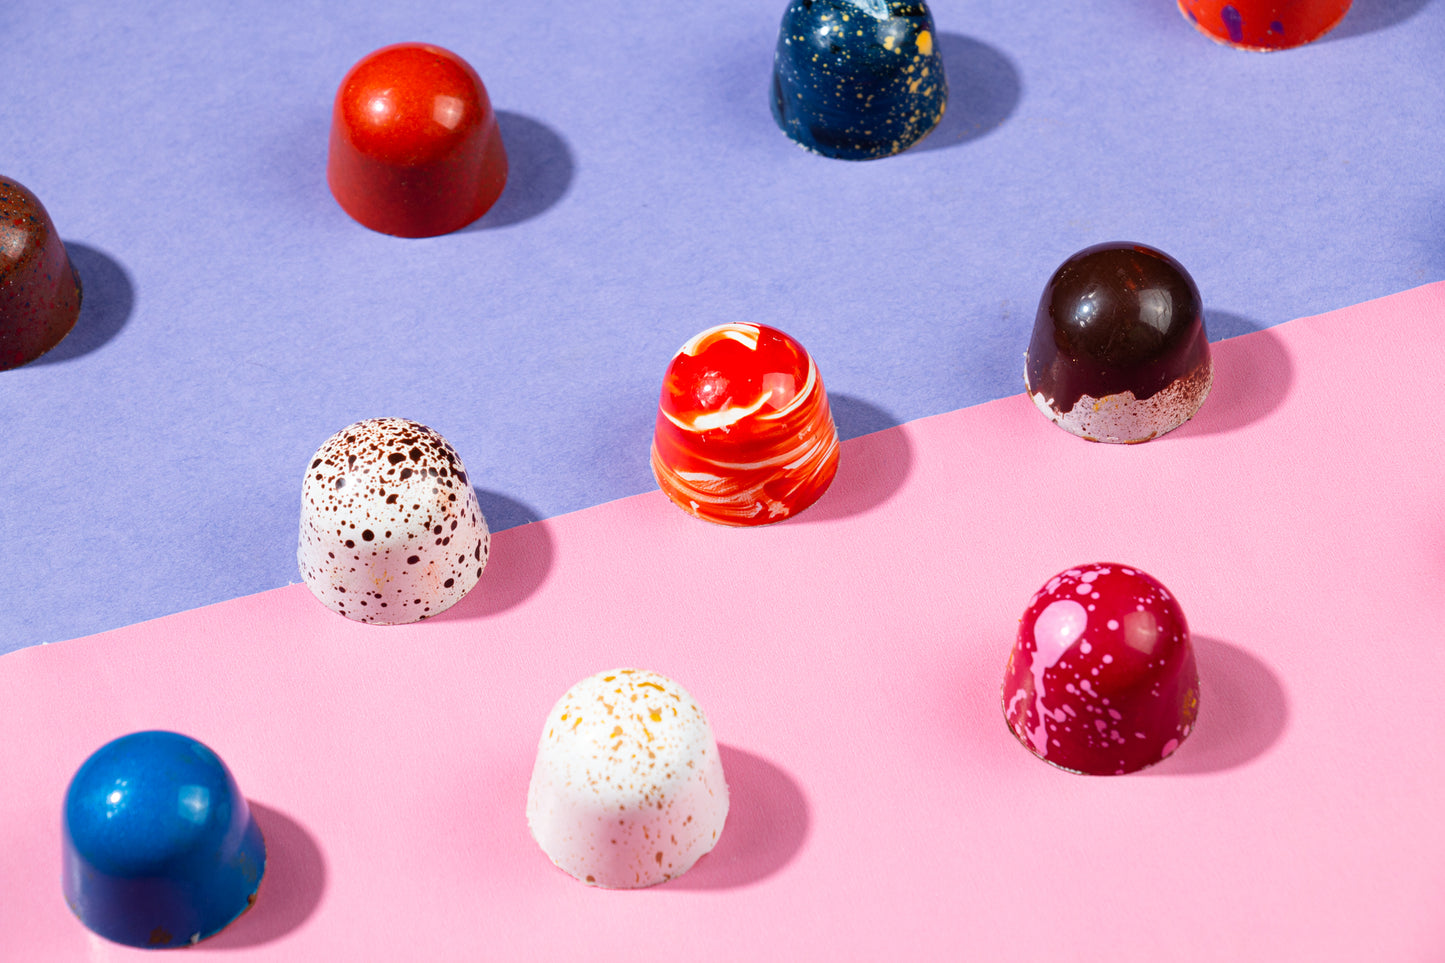 Chocolate bonbons on a pink and purple backdrop